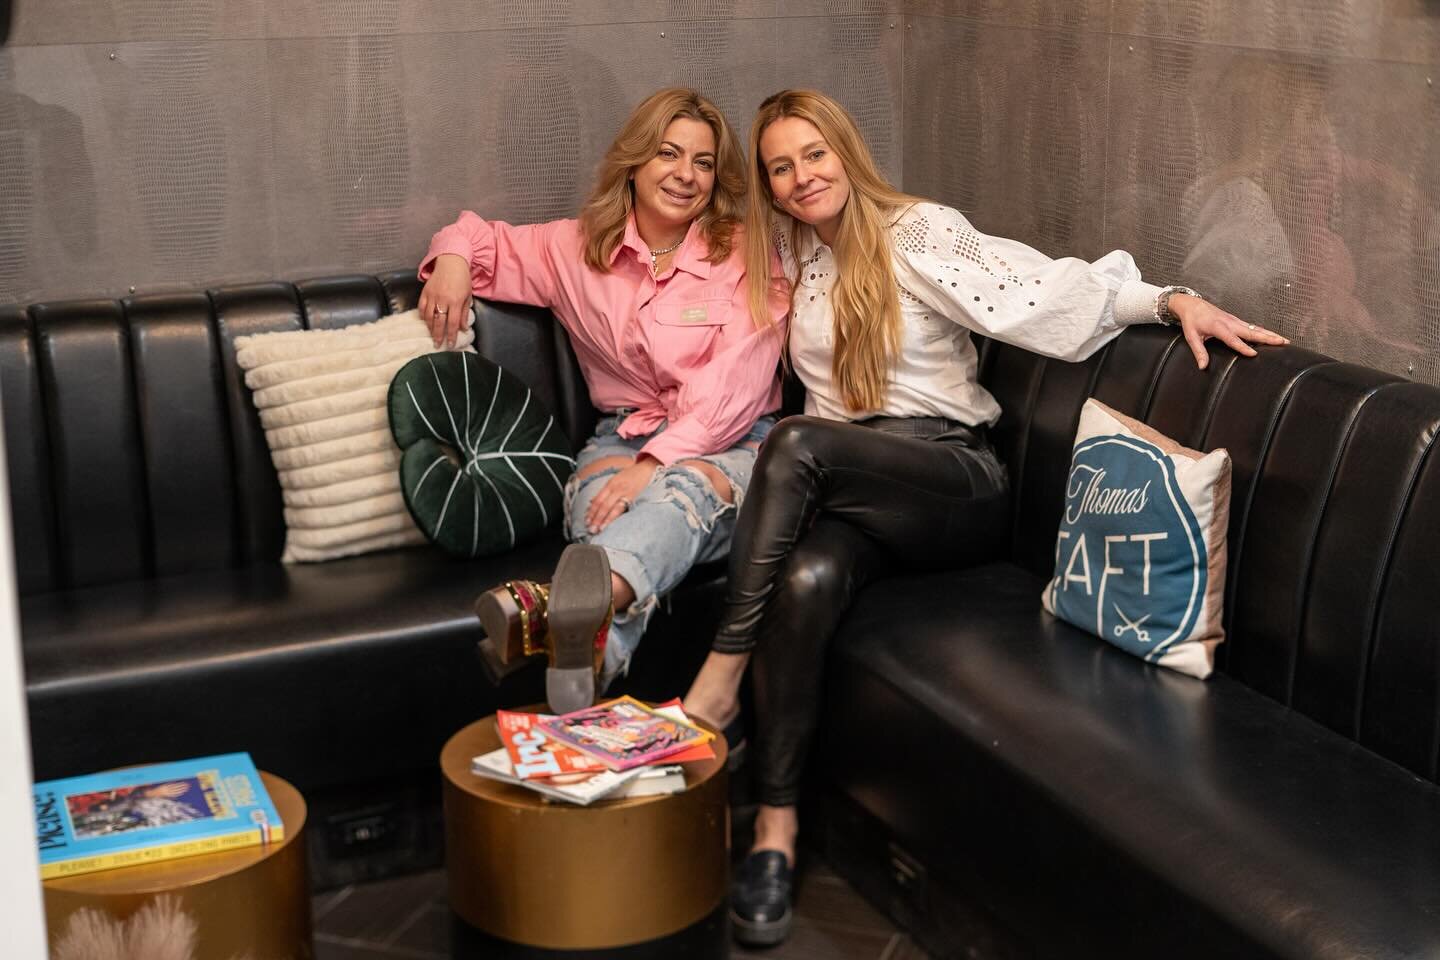 Being a woman owned &amp; operated business means we operate with humanity in the forefront, we lead with intuition and create community. Tag your favorite leading ladies below ⬇️ 

#internationalwomensday #newyorkcity #thomastaftsalon